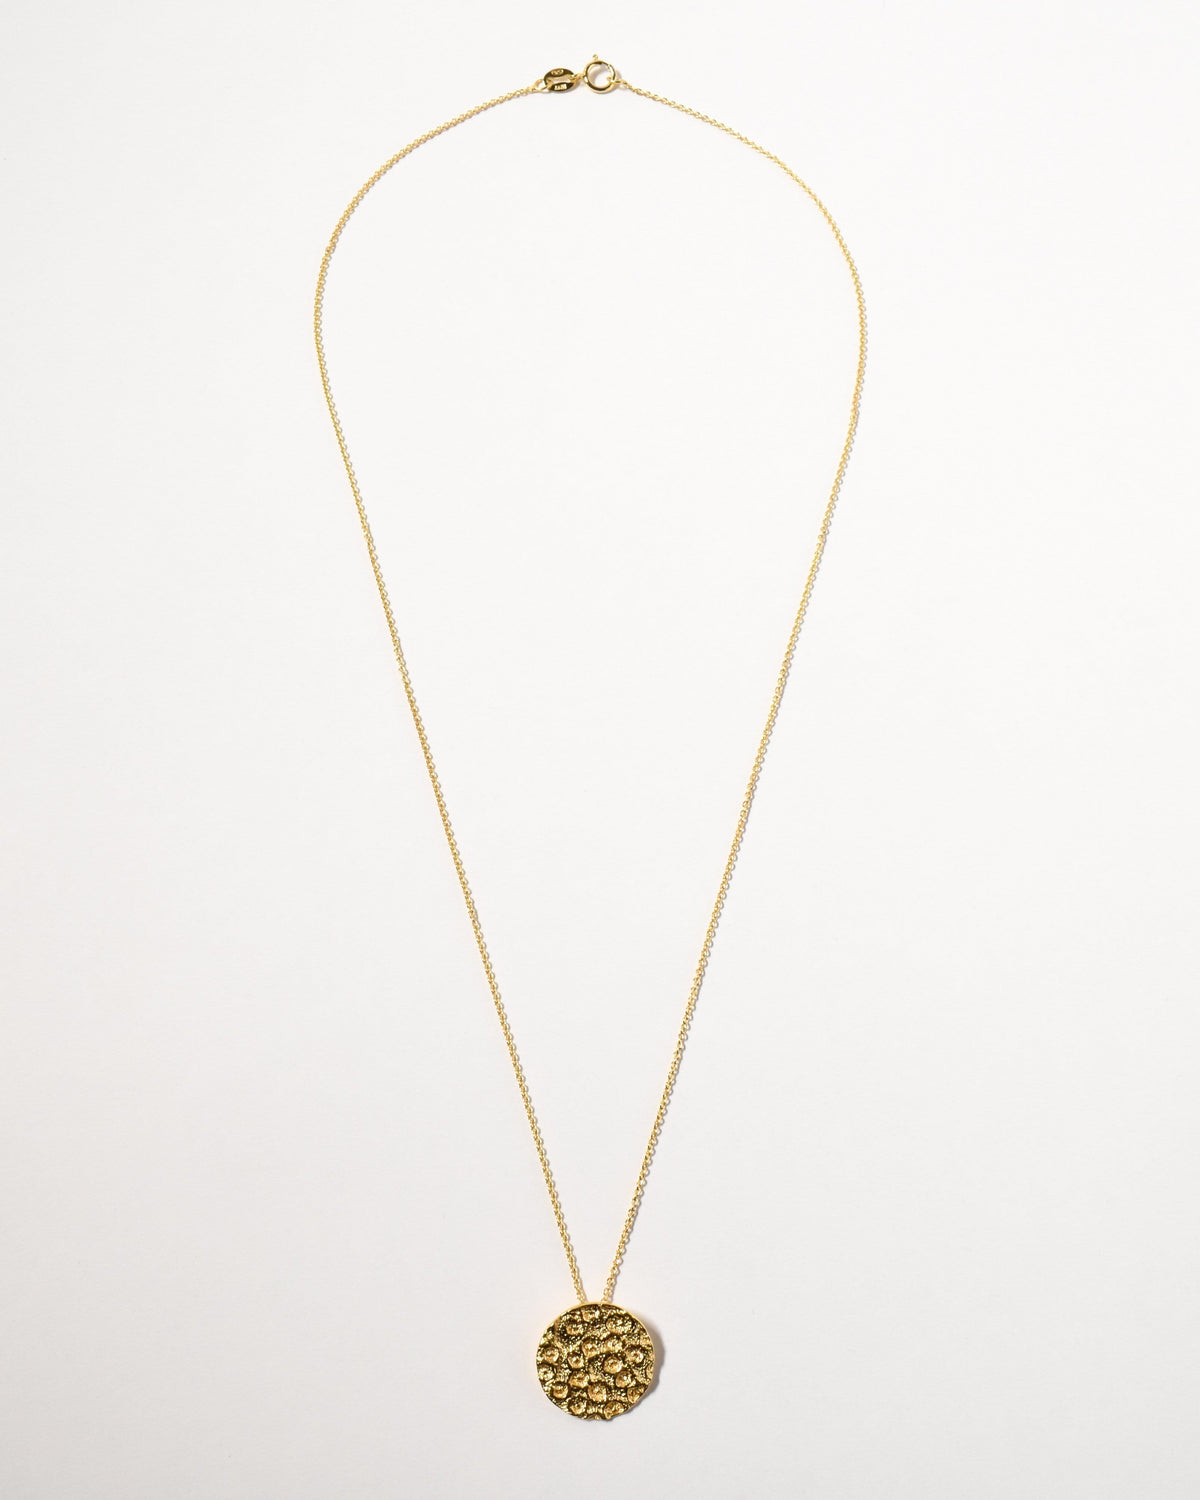 Marley Necklace, Yellow Gold Plated